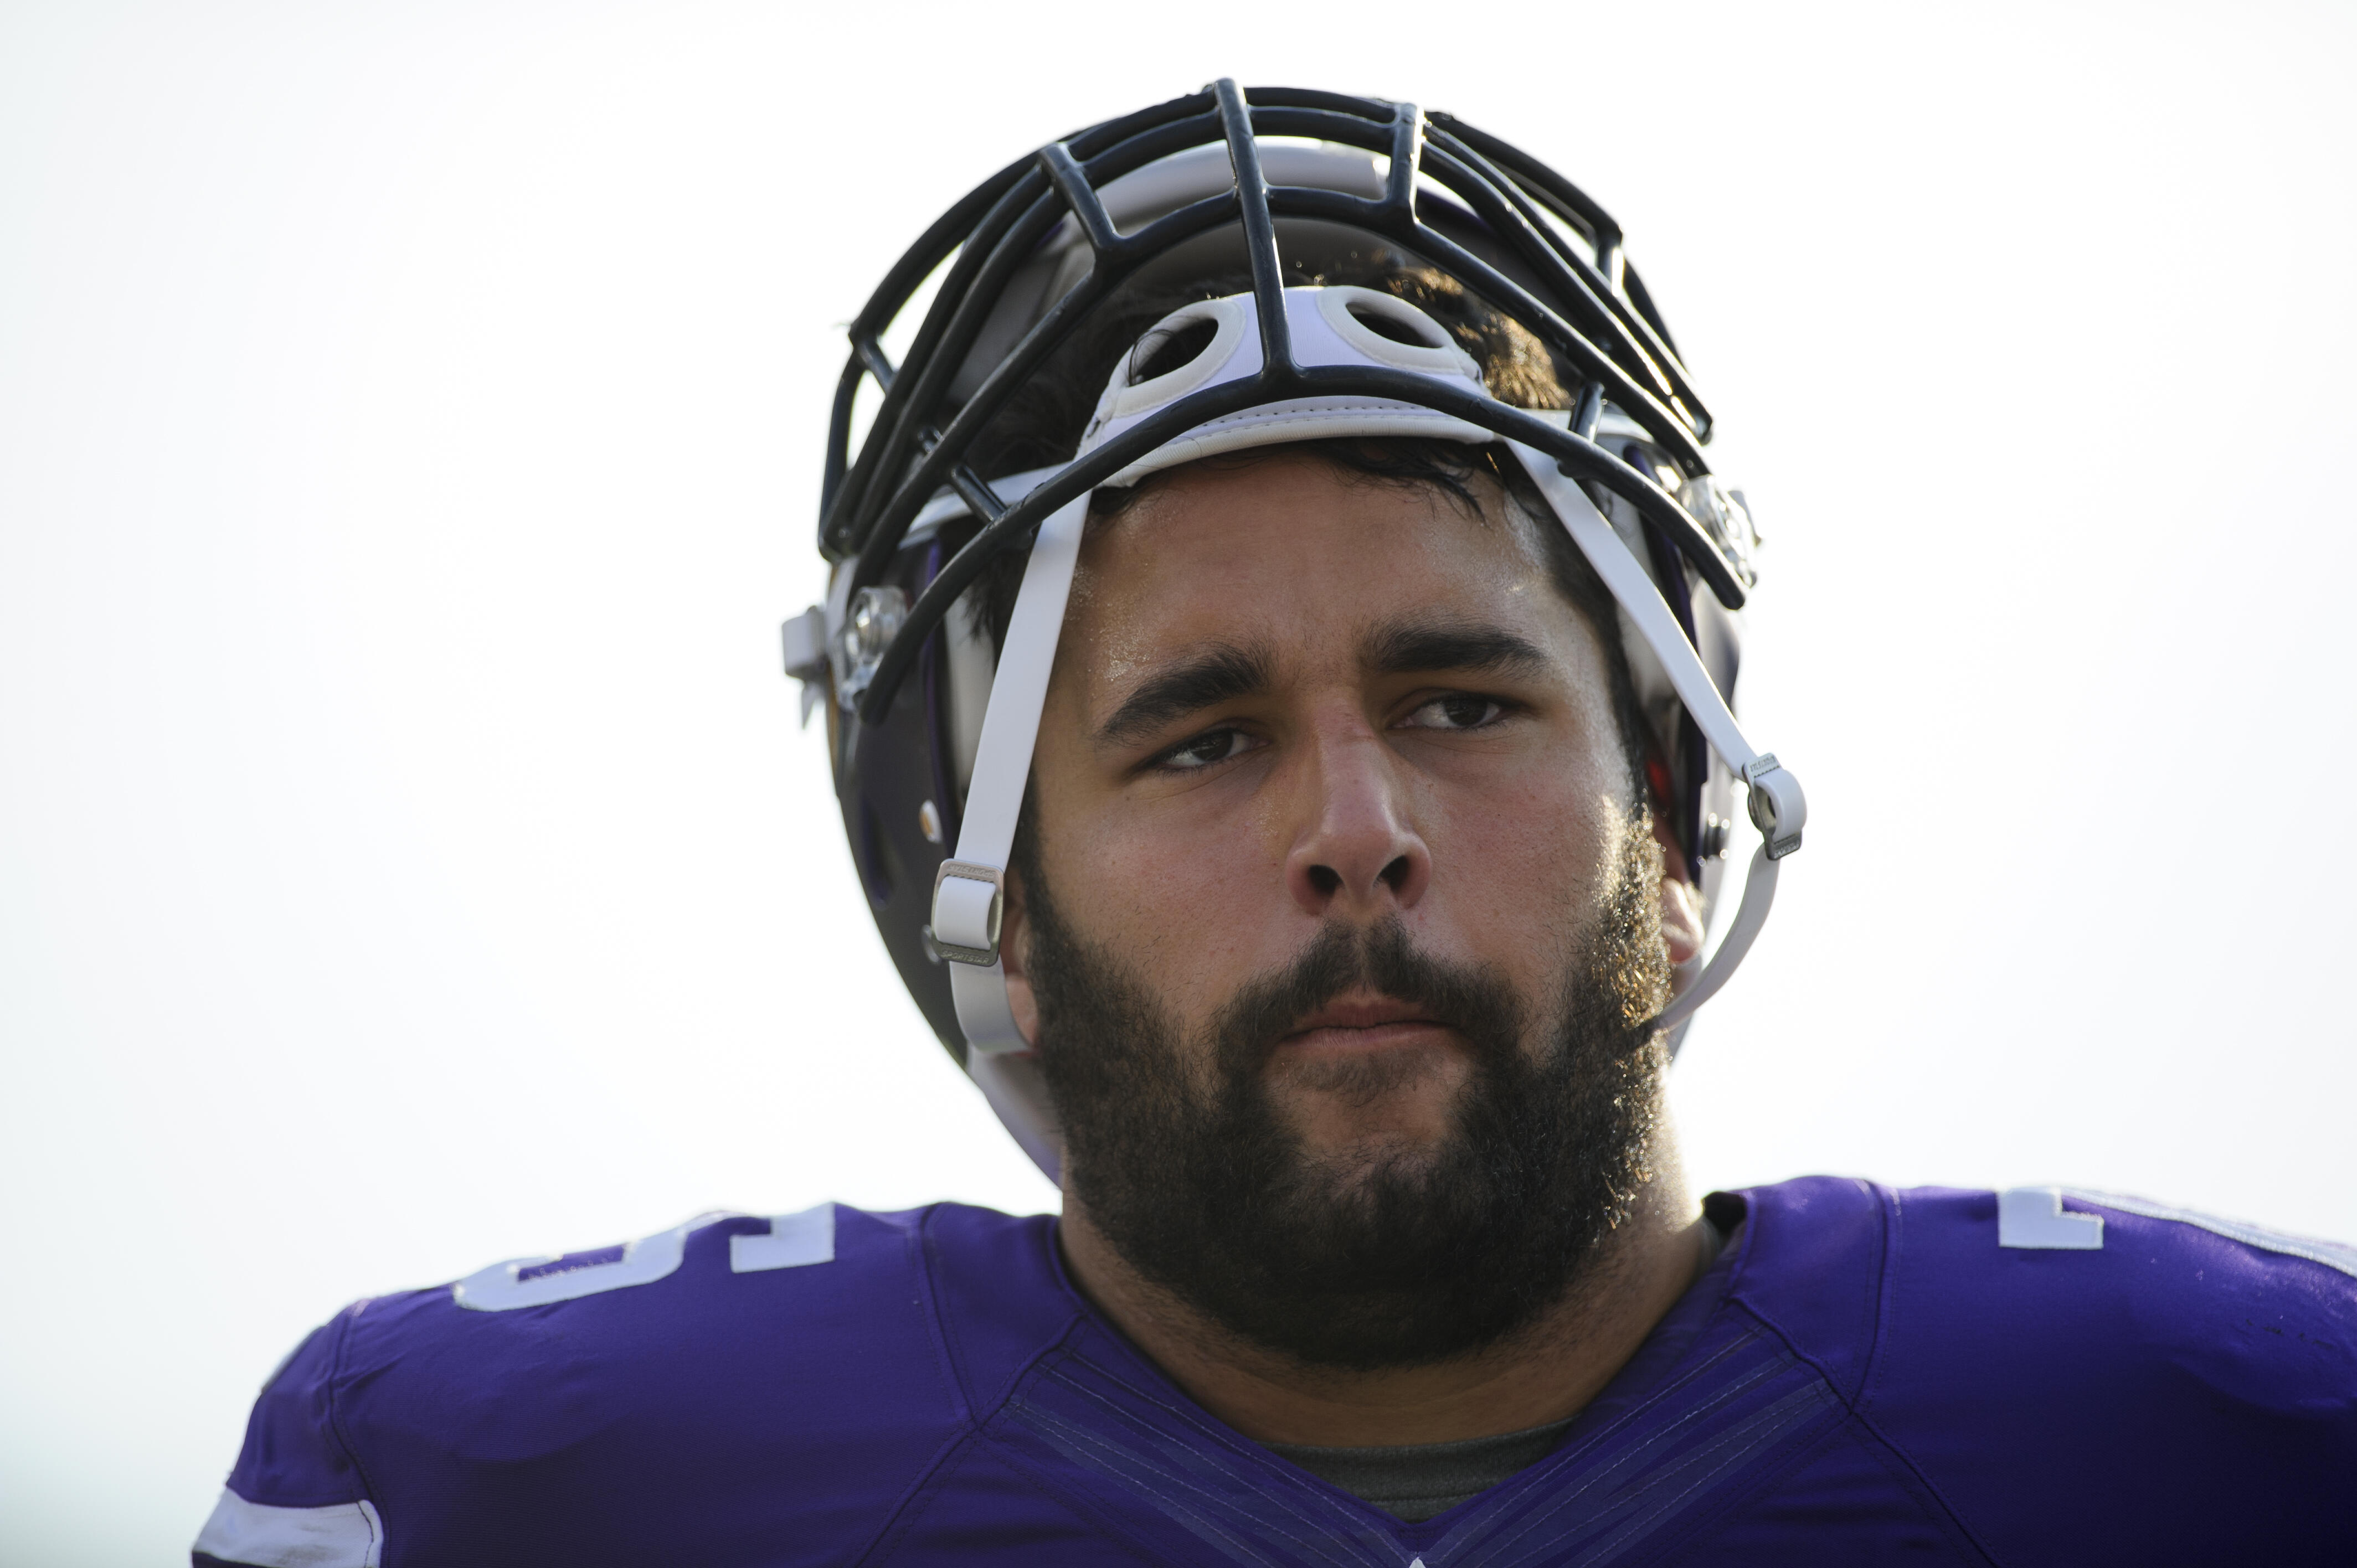 MINNEAPOLIS, MN - AUGUST 8: Matt Kalil #75 of the Minnesota Vikings looks on before the game against the Oakland Raiders on August 8, 2014 at TCF Bank Stadium in Minneapolis, Minnesota. (Photo by Hannah Foslien/Getty Images)